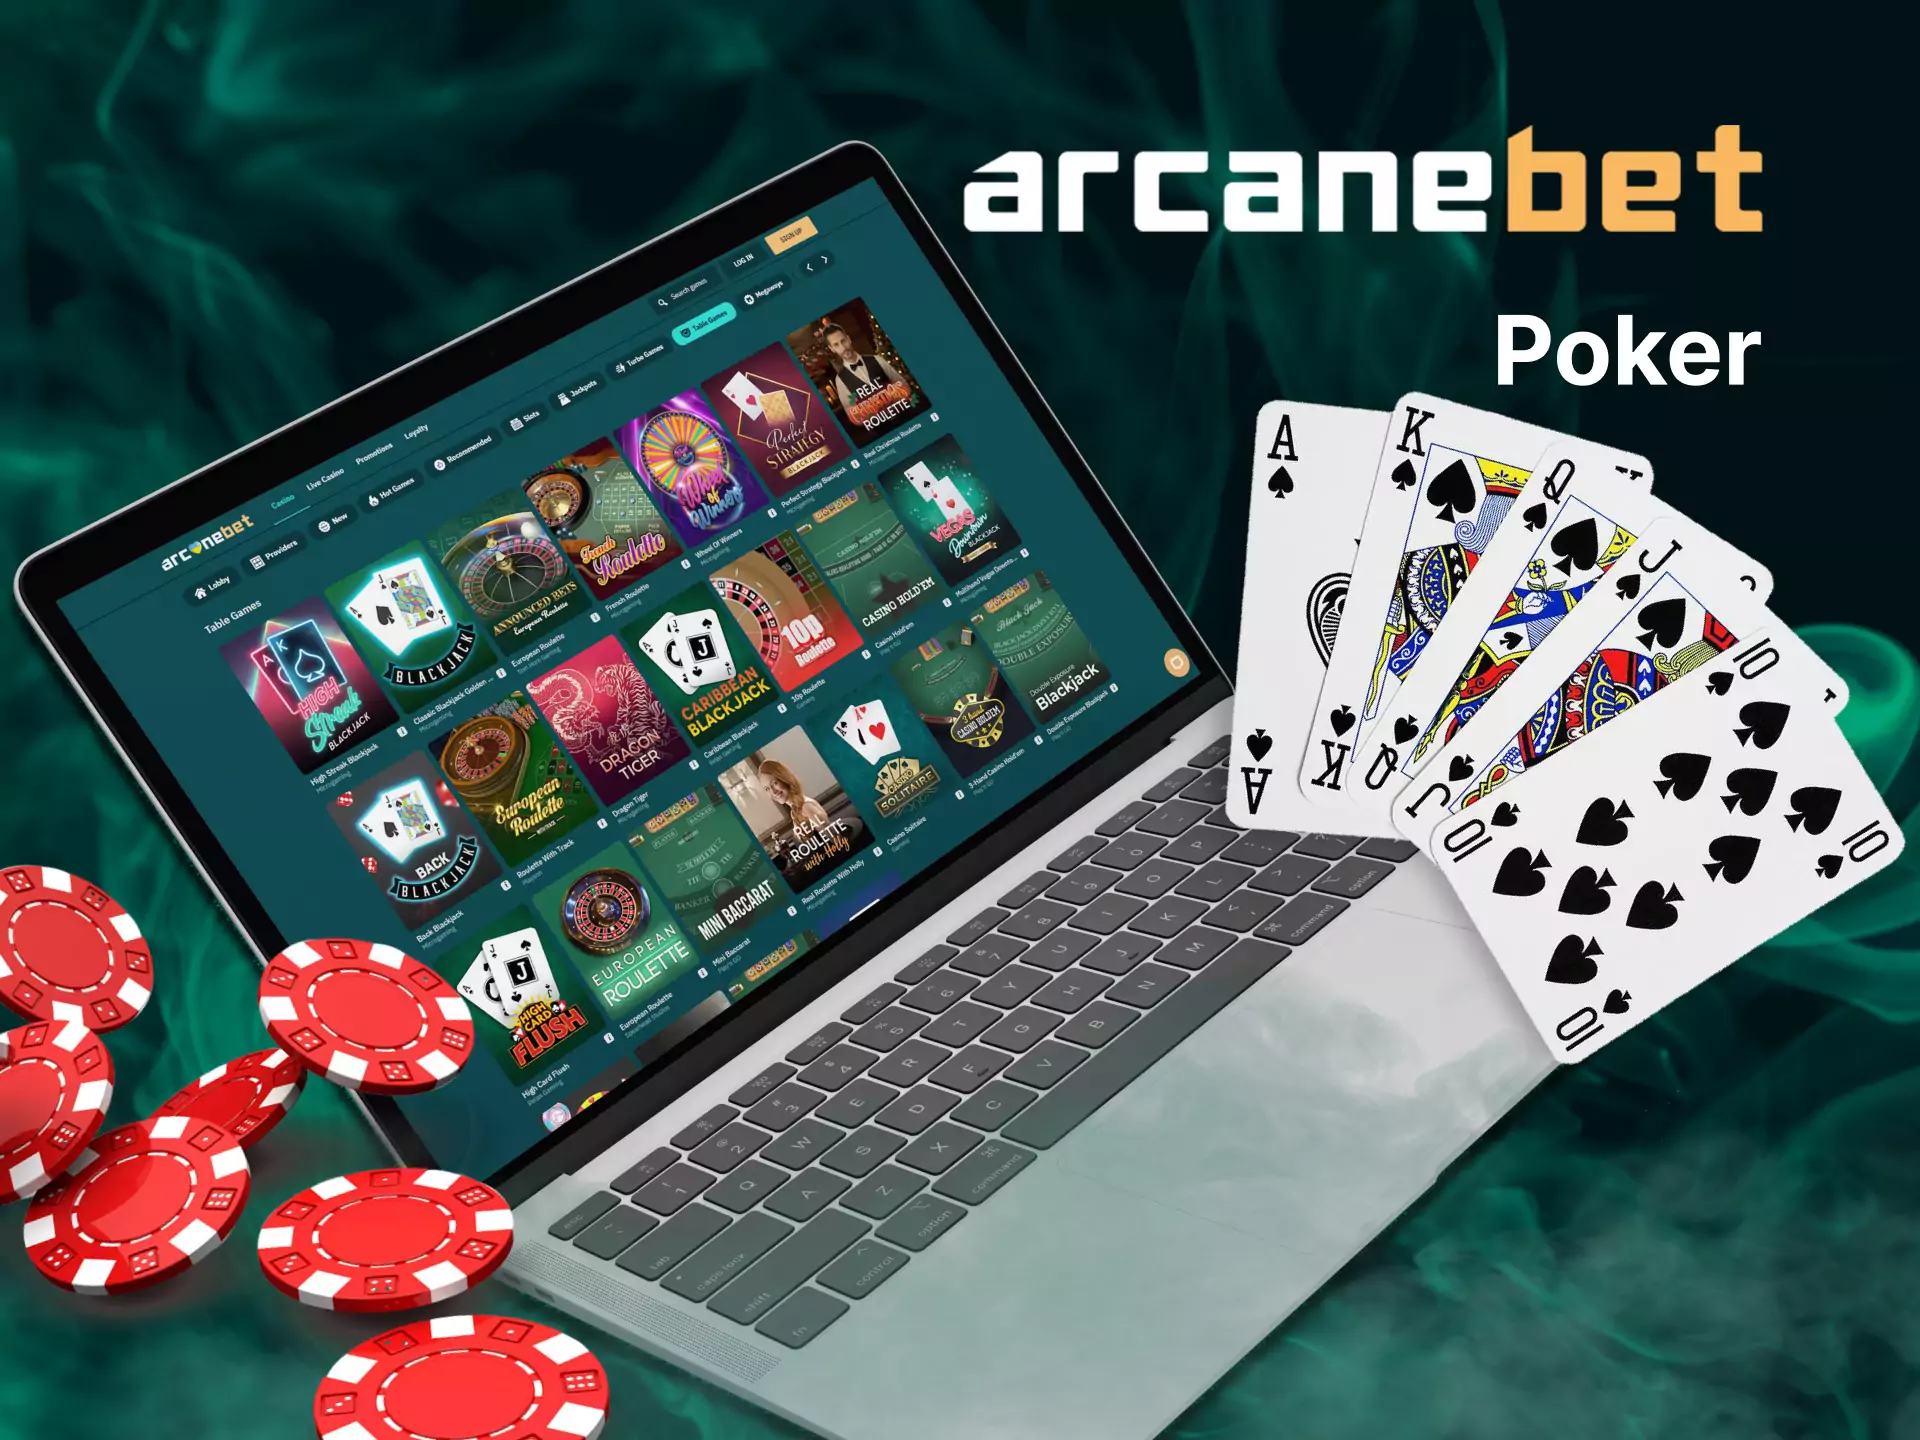 Play poker with Arcanebet and win.